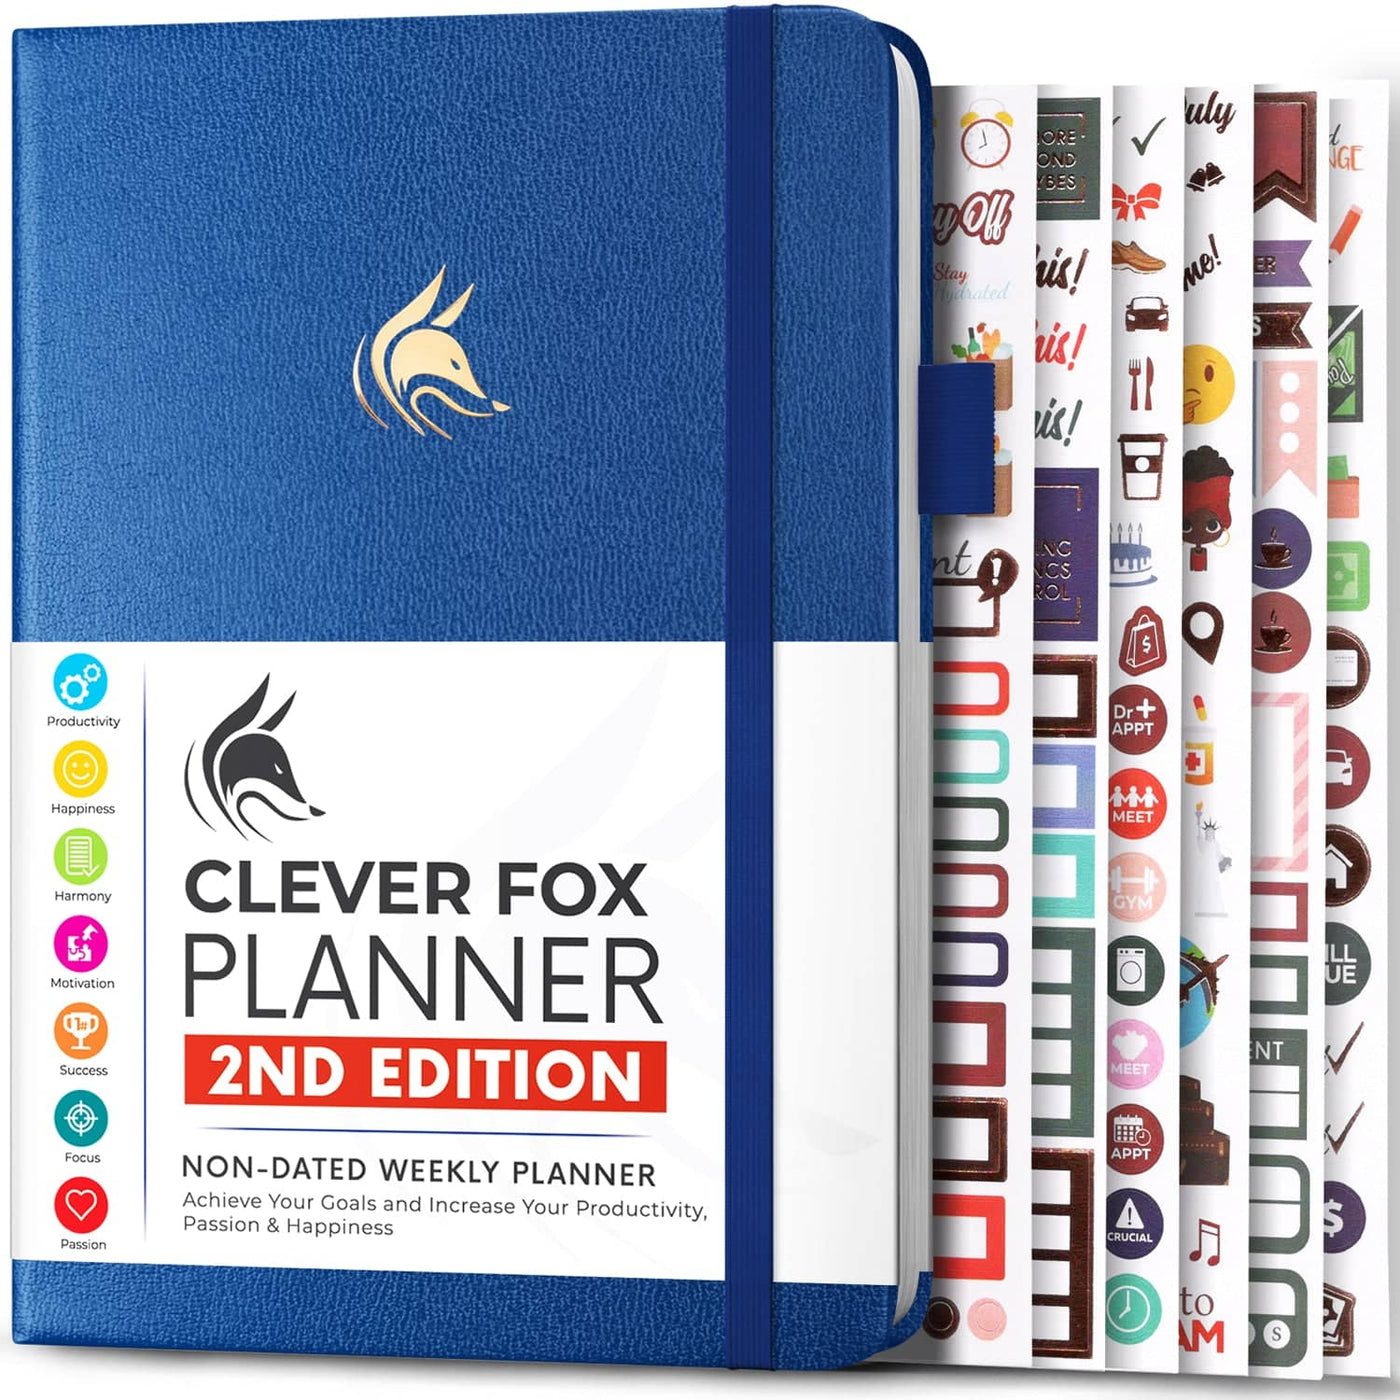 Clever Fox Budget Book 2nd Edition by Clever Fox